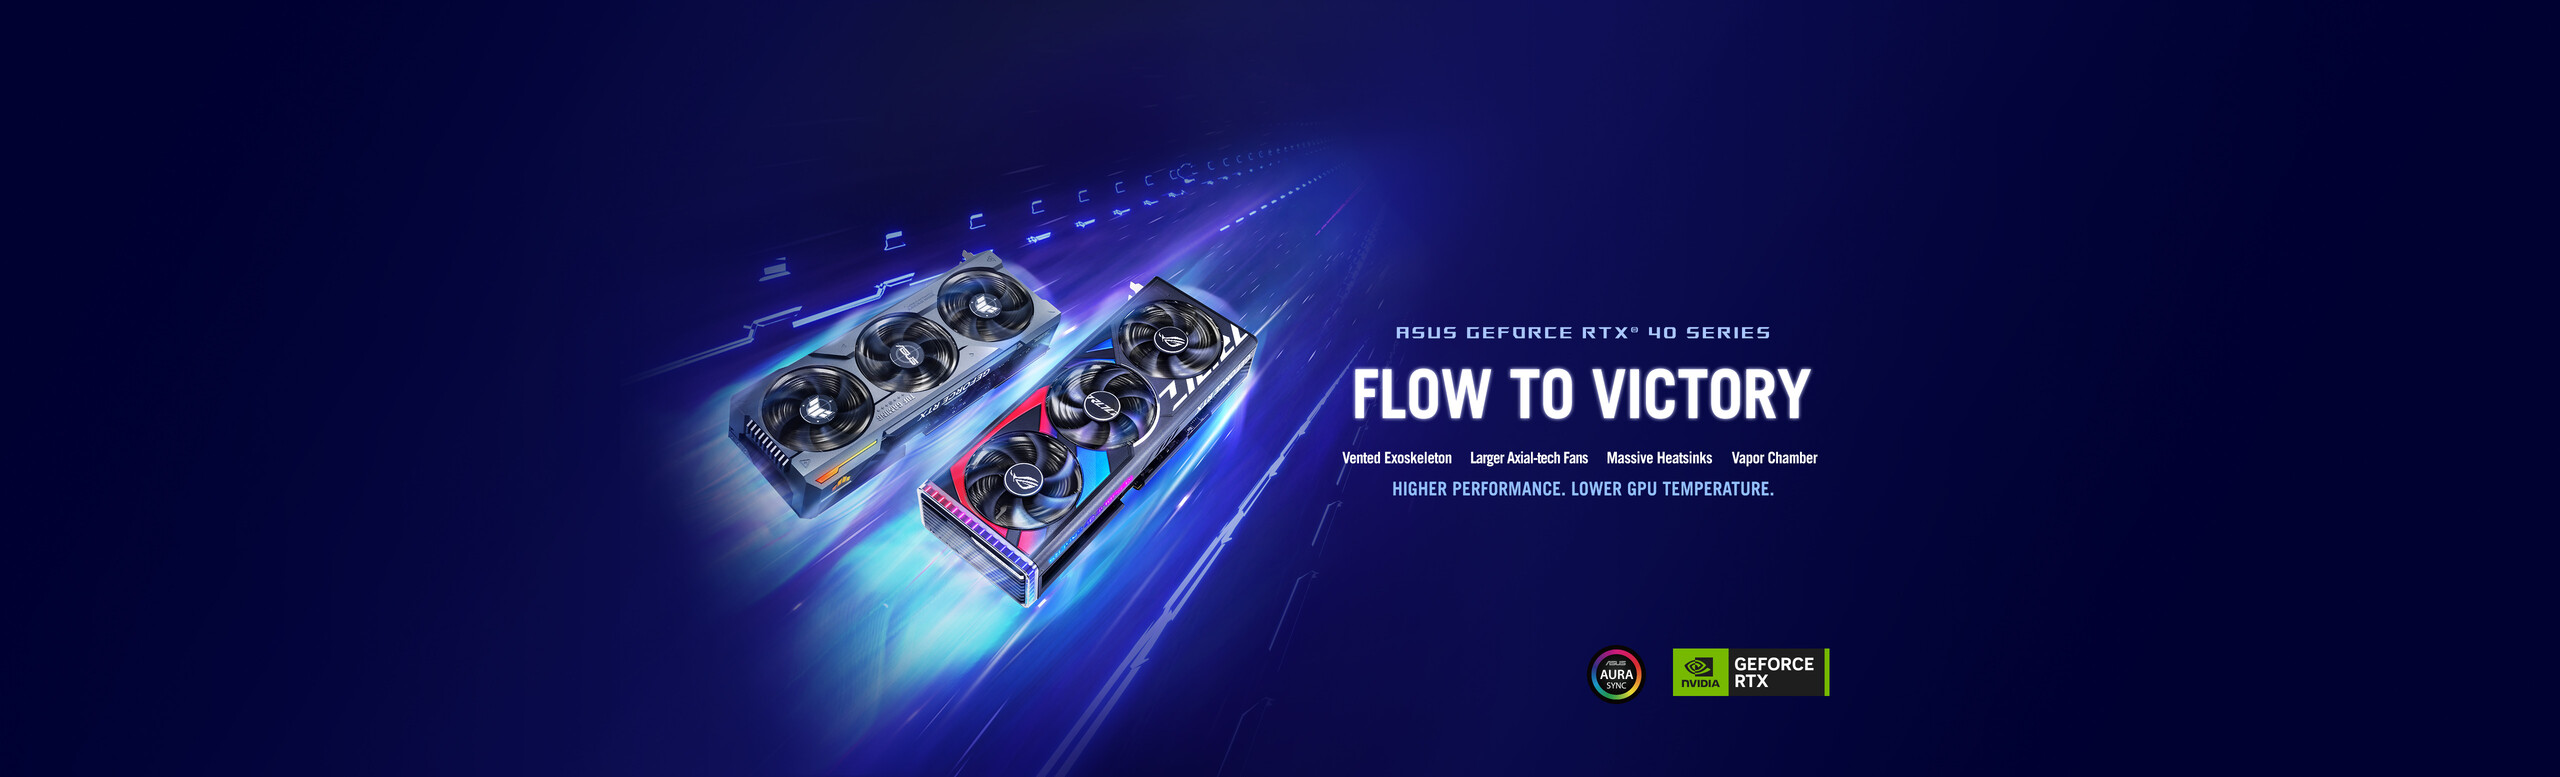 ROG Strix and TUF Gaming GeForce RTX 40 Series Cards